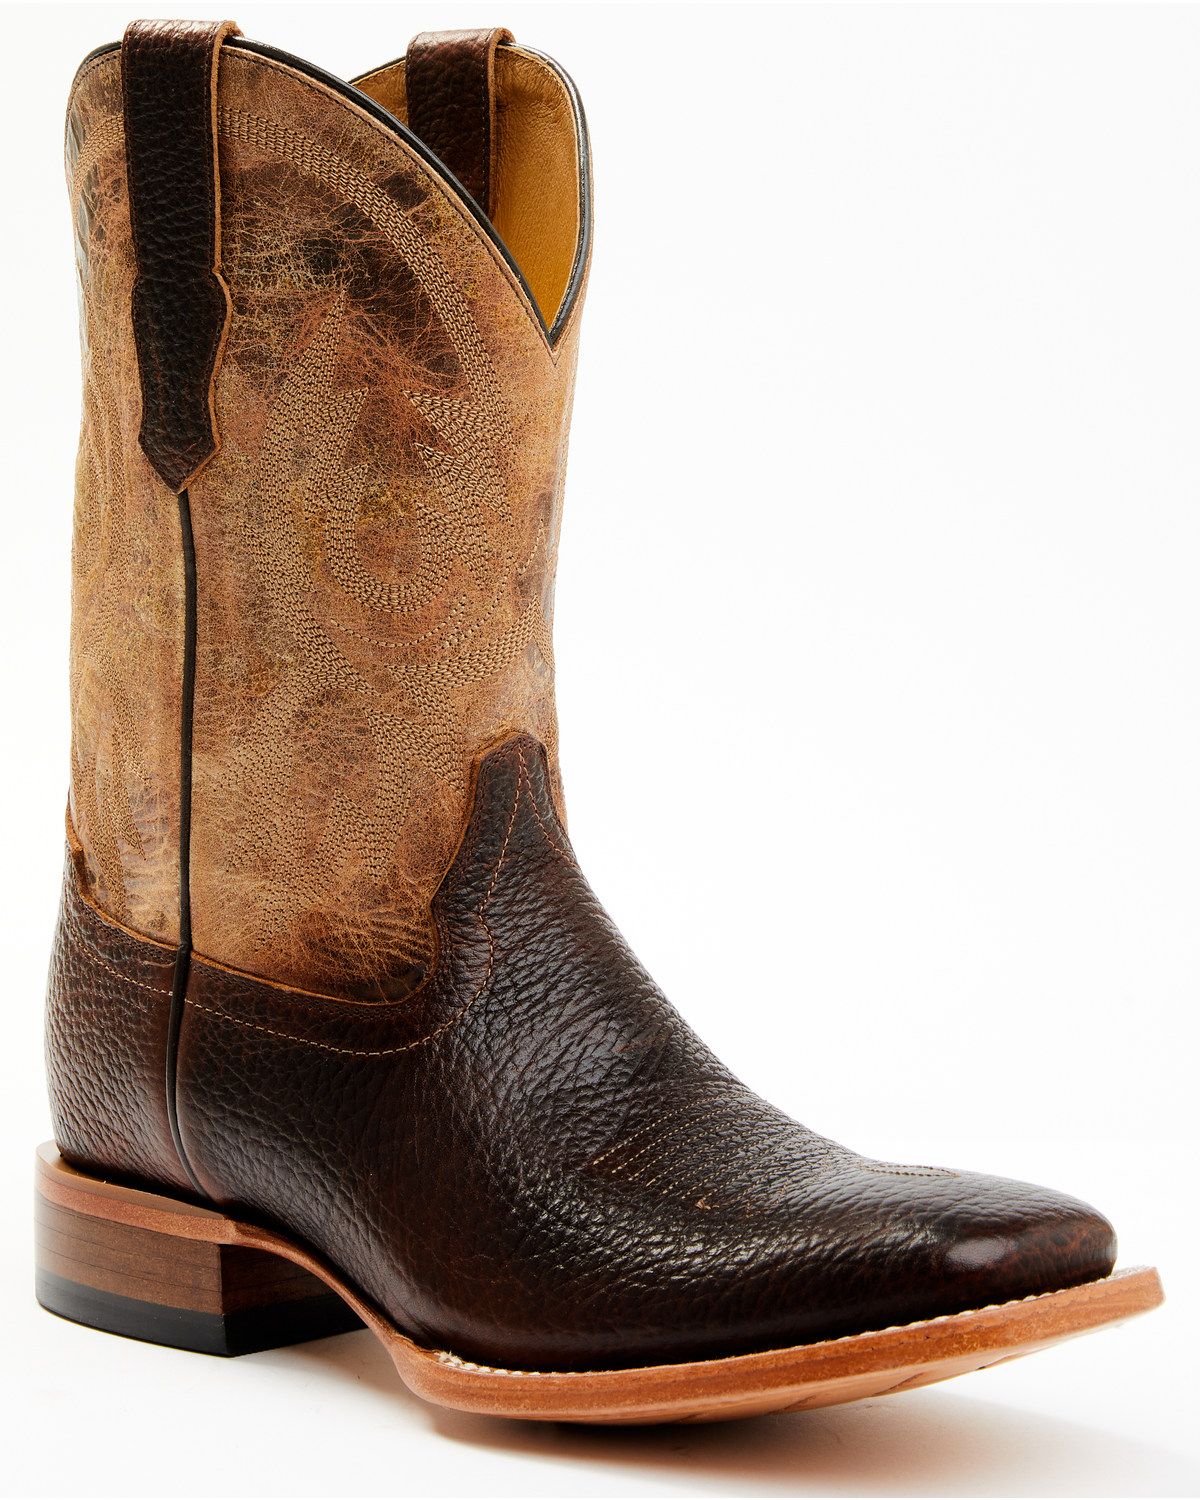 Cody James Men's Wade Western Boots - Broad Square Toe